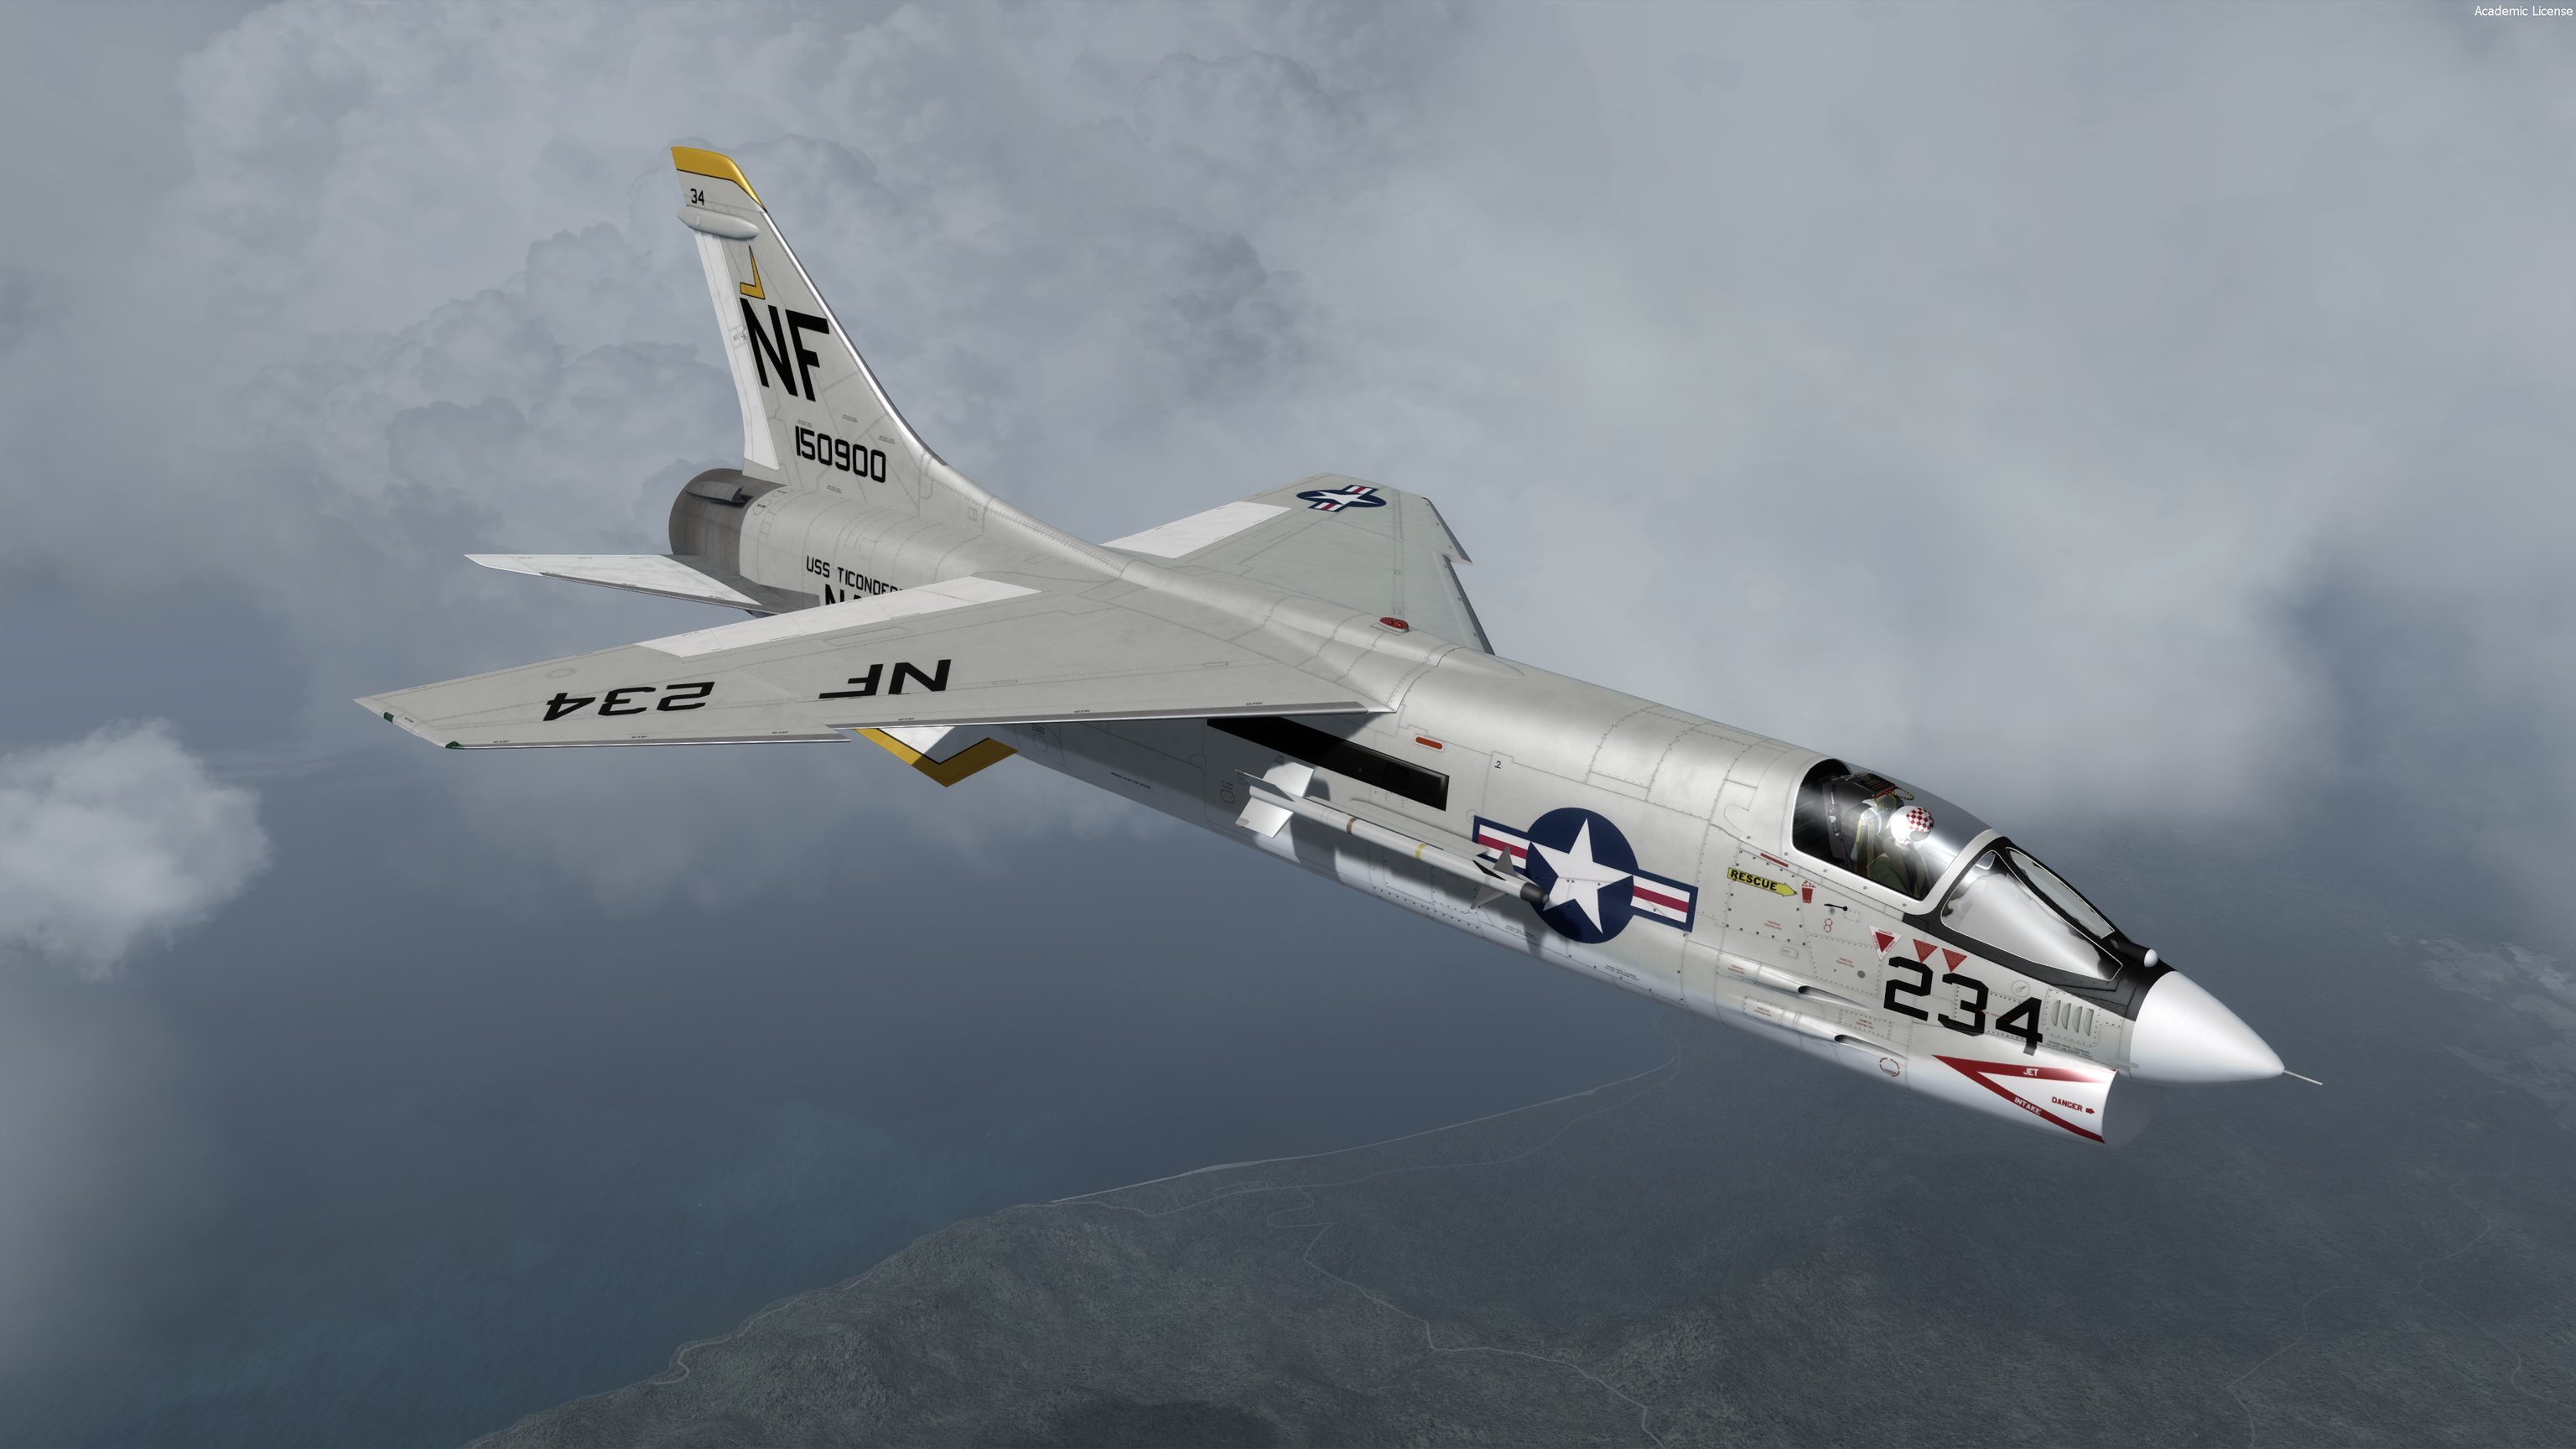 RFN F-8 Crusader is out! 